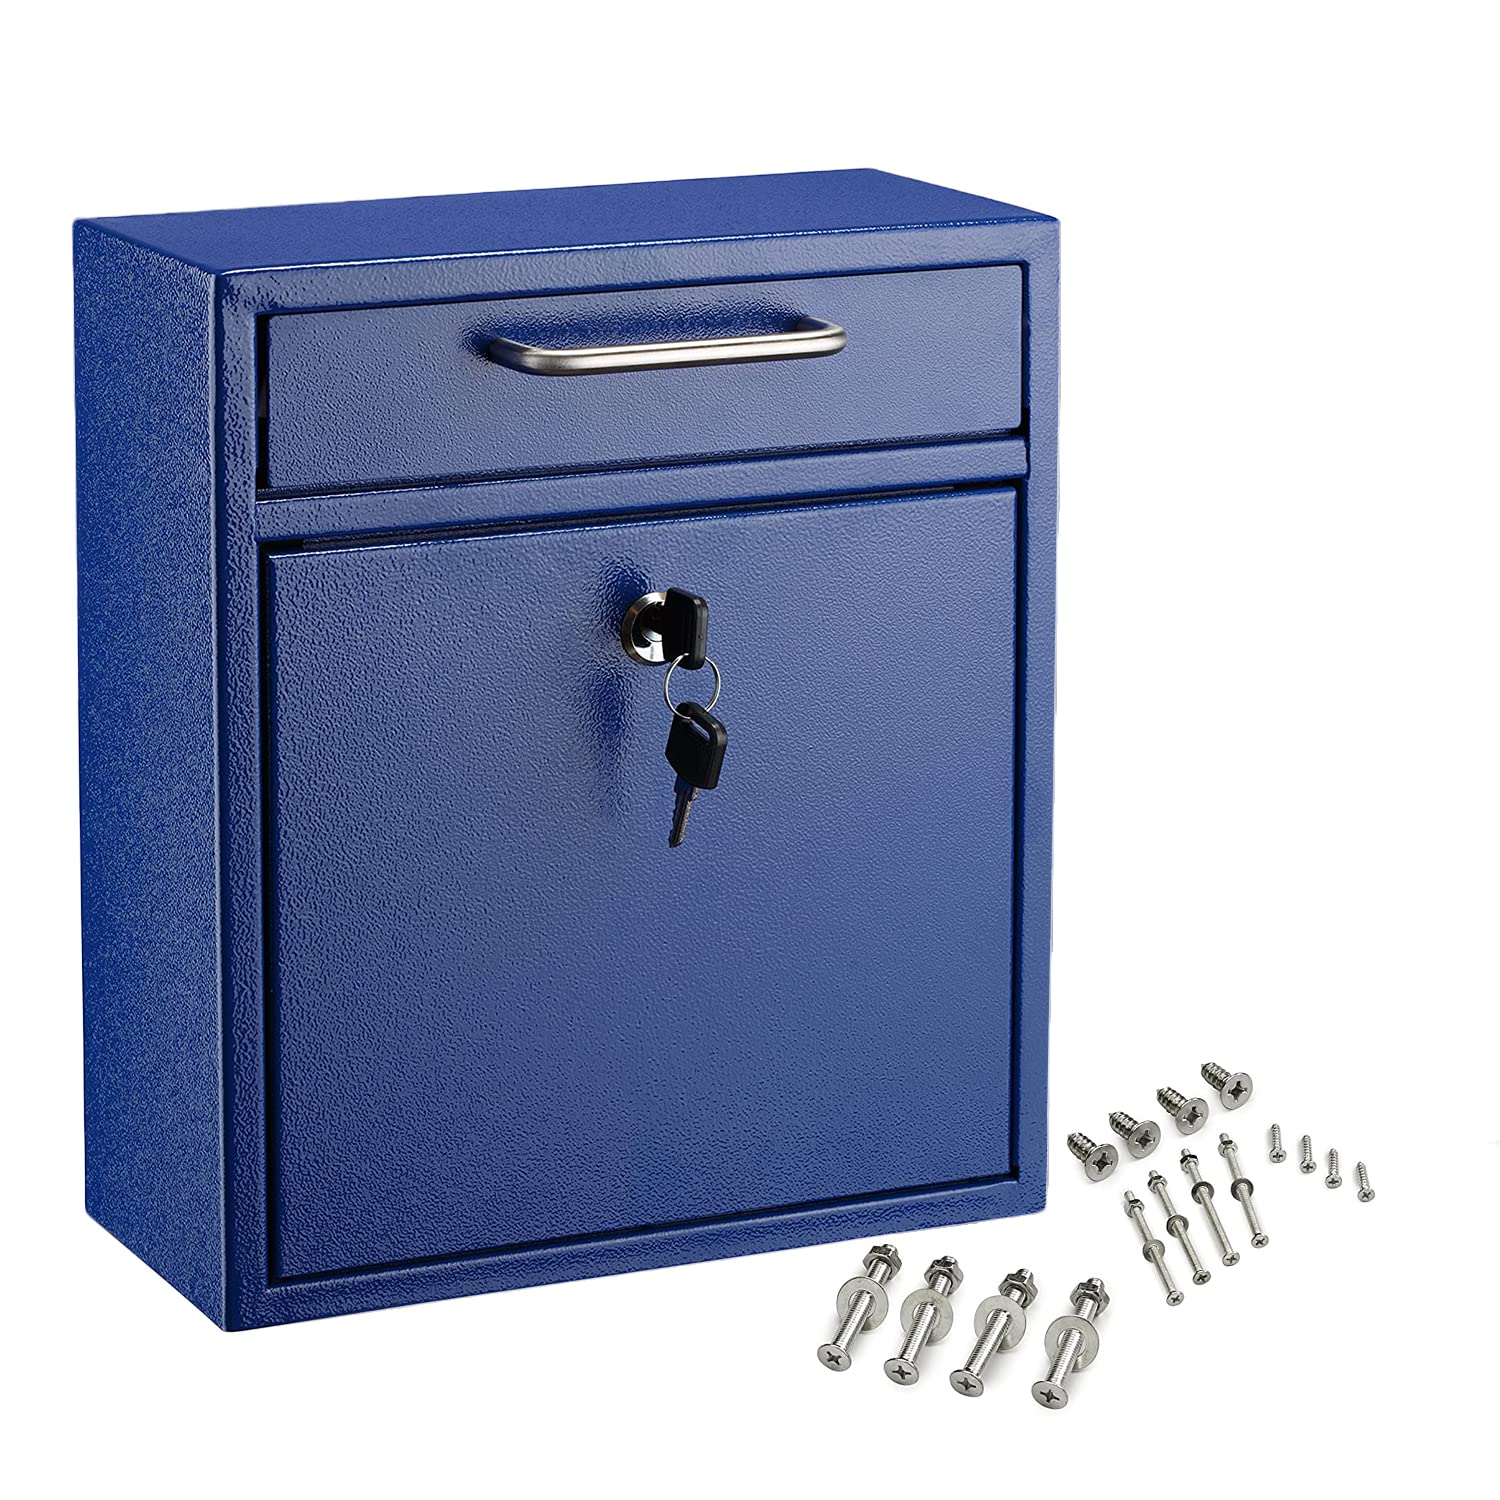 Adir Mailboxes for Outside with Lock- Outdoor Hanging Mailbox, Cash Drop Box, Key Drop Off Box with Lock - Wall Mounted Residential Mailbox with Locks for Checks, Keys, Cash and More  - Like New